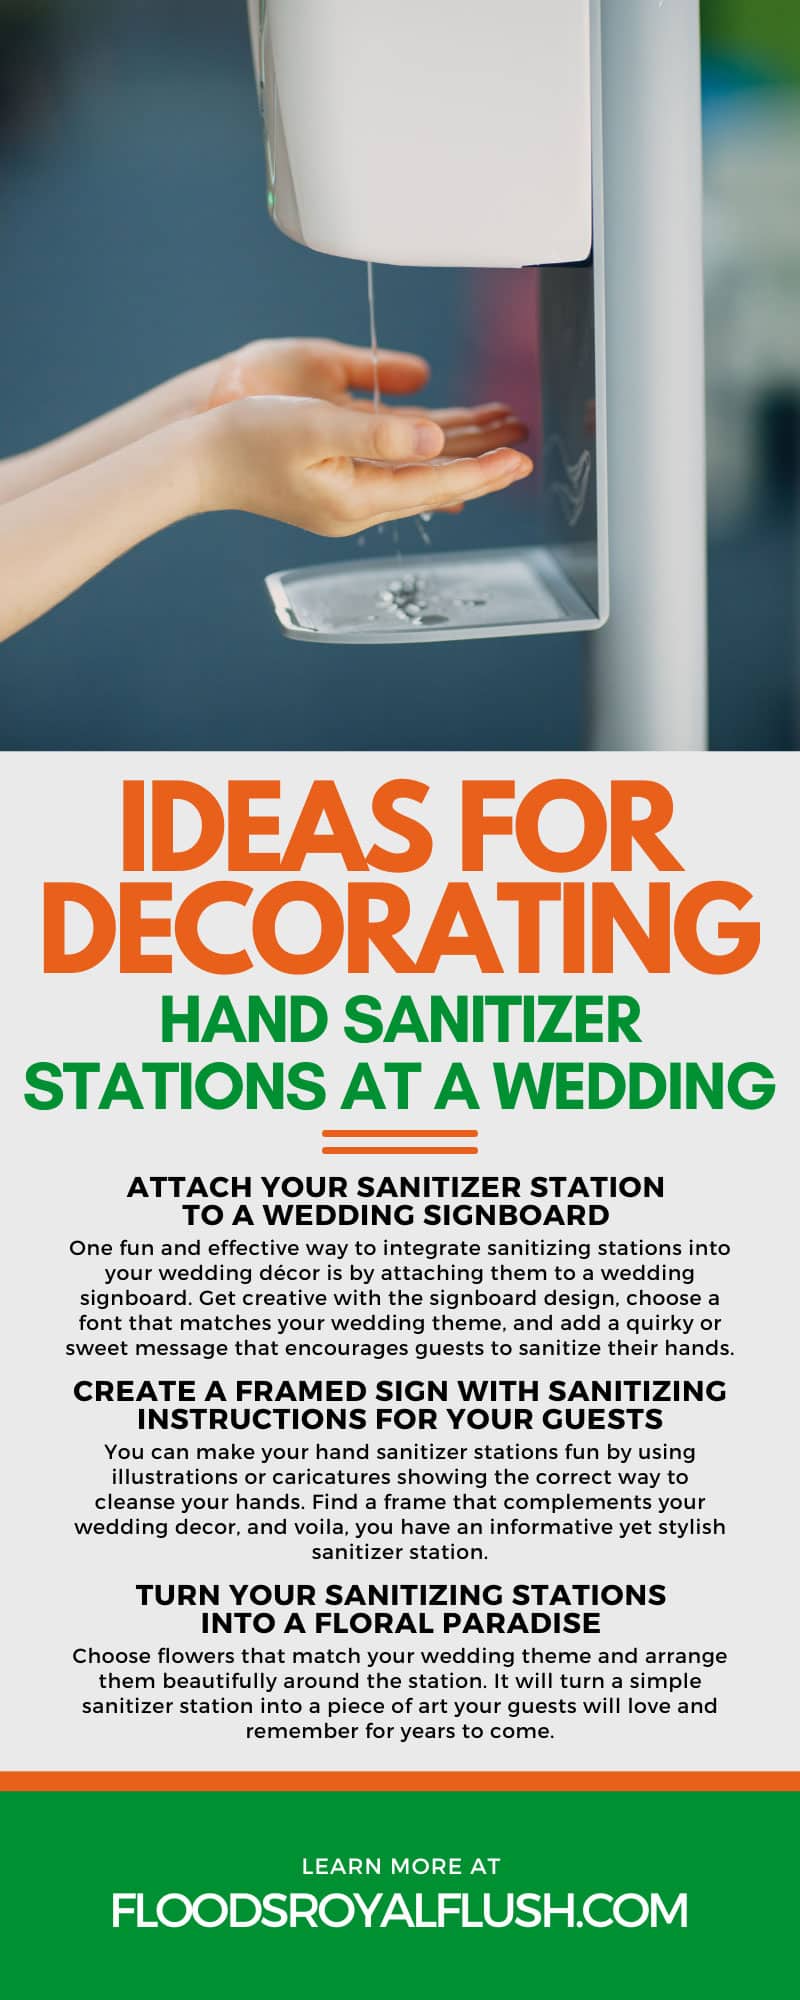 Ideas for Decorating Hand Sanitizer Stations at a Wedding